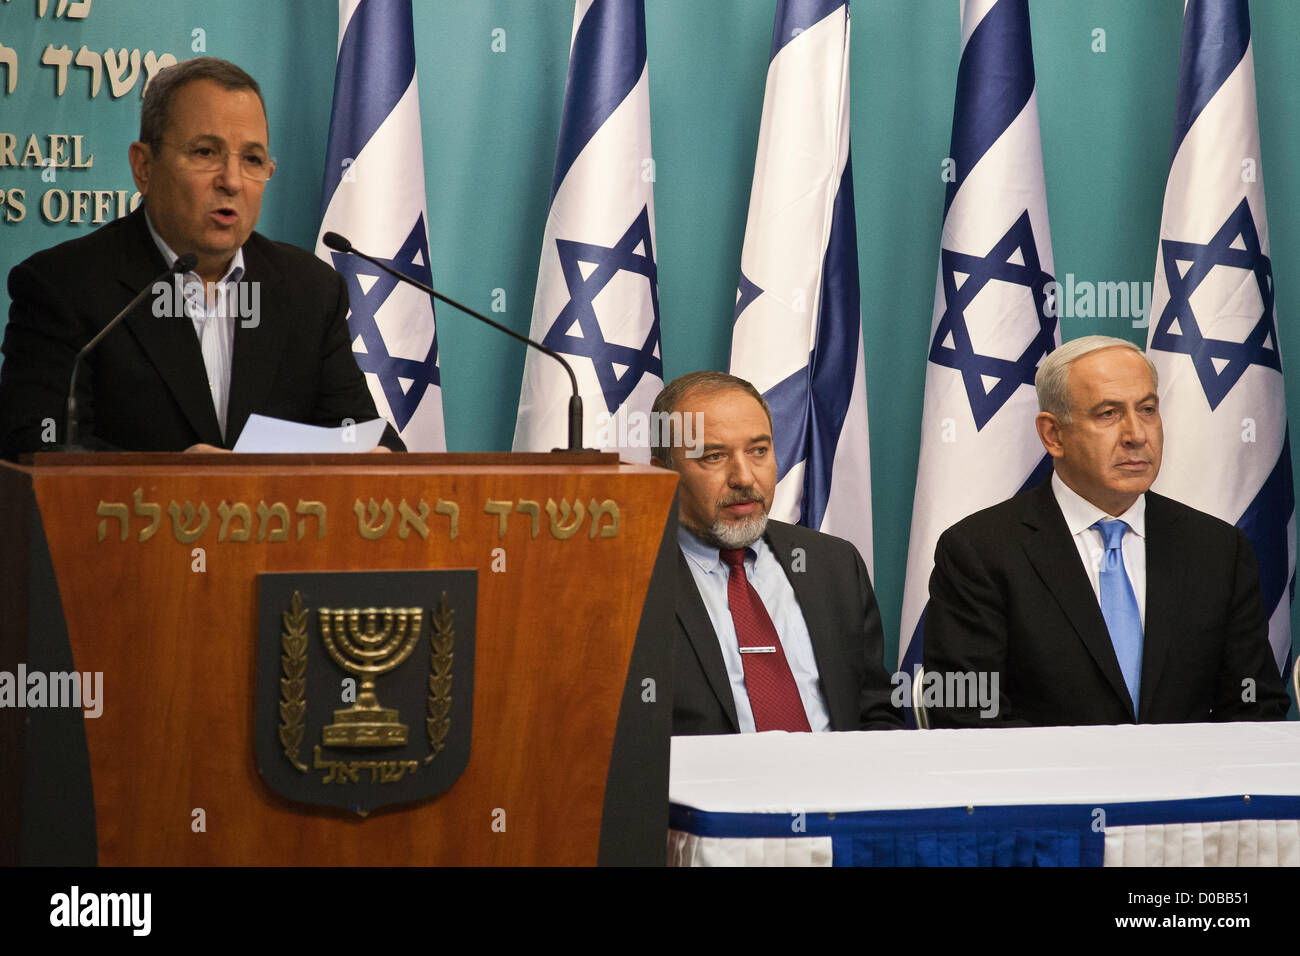 Minister of Defense Ehud Barak addresses the nation at a press conference announcing Pillar of Defense ceasefire agreement and announces 'All IDF military objectives have been achieved'. Jerusalem, Israel. 21-Nov-2012.  Prime Minister Benjamin Netanyahu holds a press conference with Foreign Minister Avigdor Lieberman and Defense Minister Ehud Barak announcing ceasefire agreement with Hamas ending Operation Pillar of Defense. Stock Photo